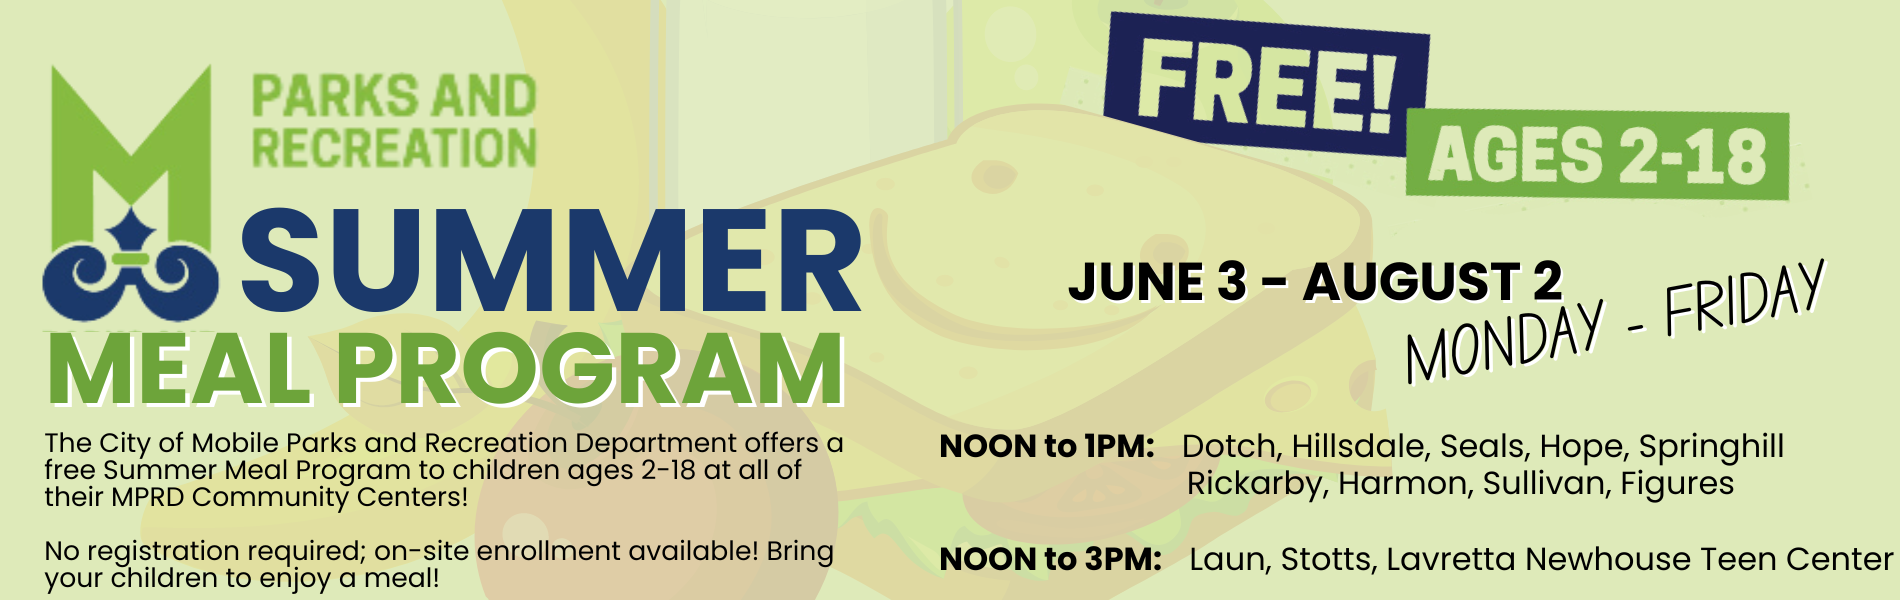 Free summer lunch